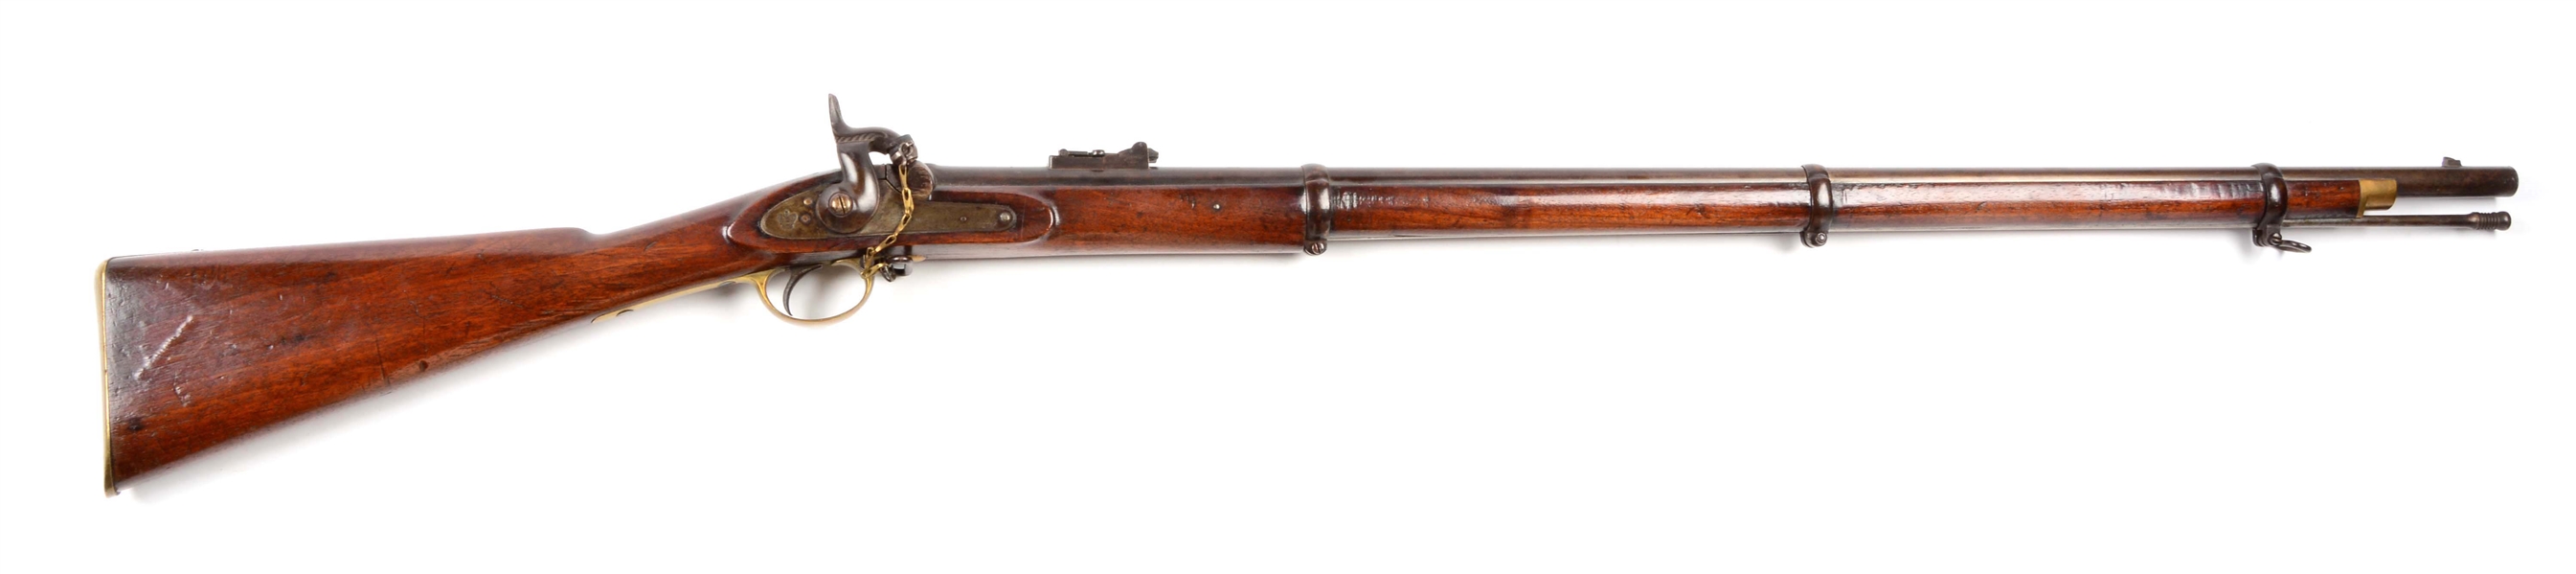 (A) ENFIELD PATTERN 1853 PERCUSSION RIFLE MUSKET.